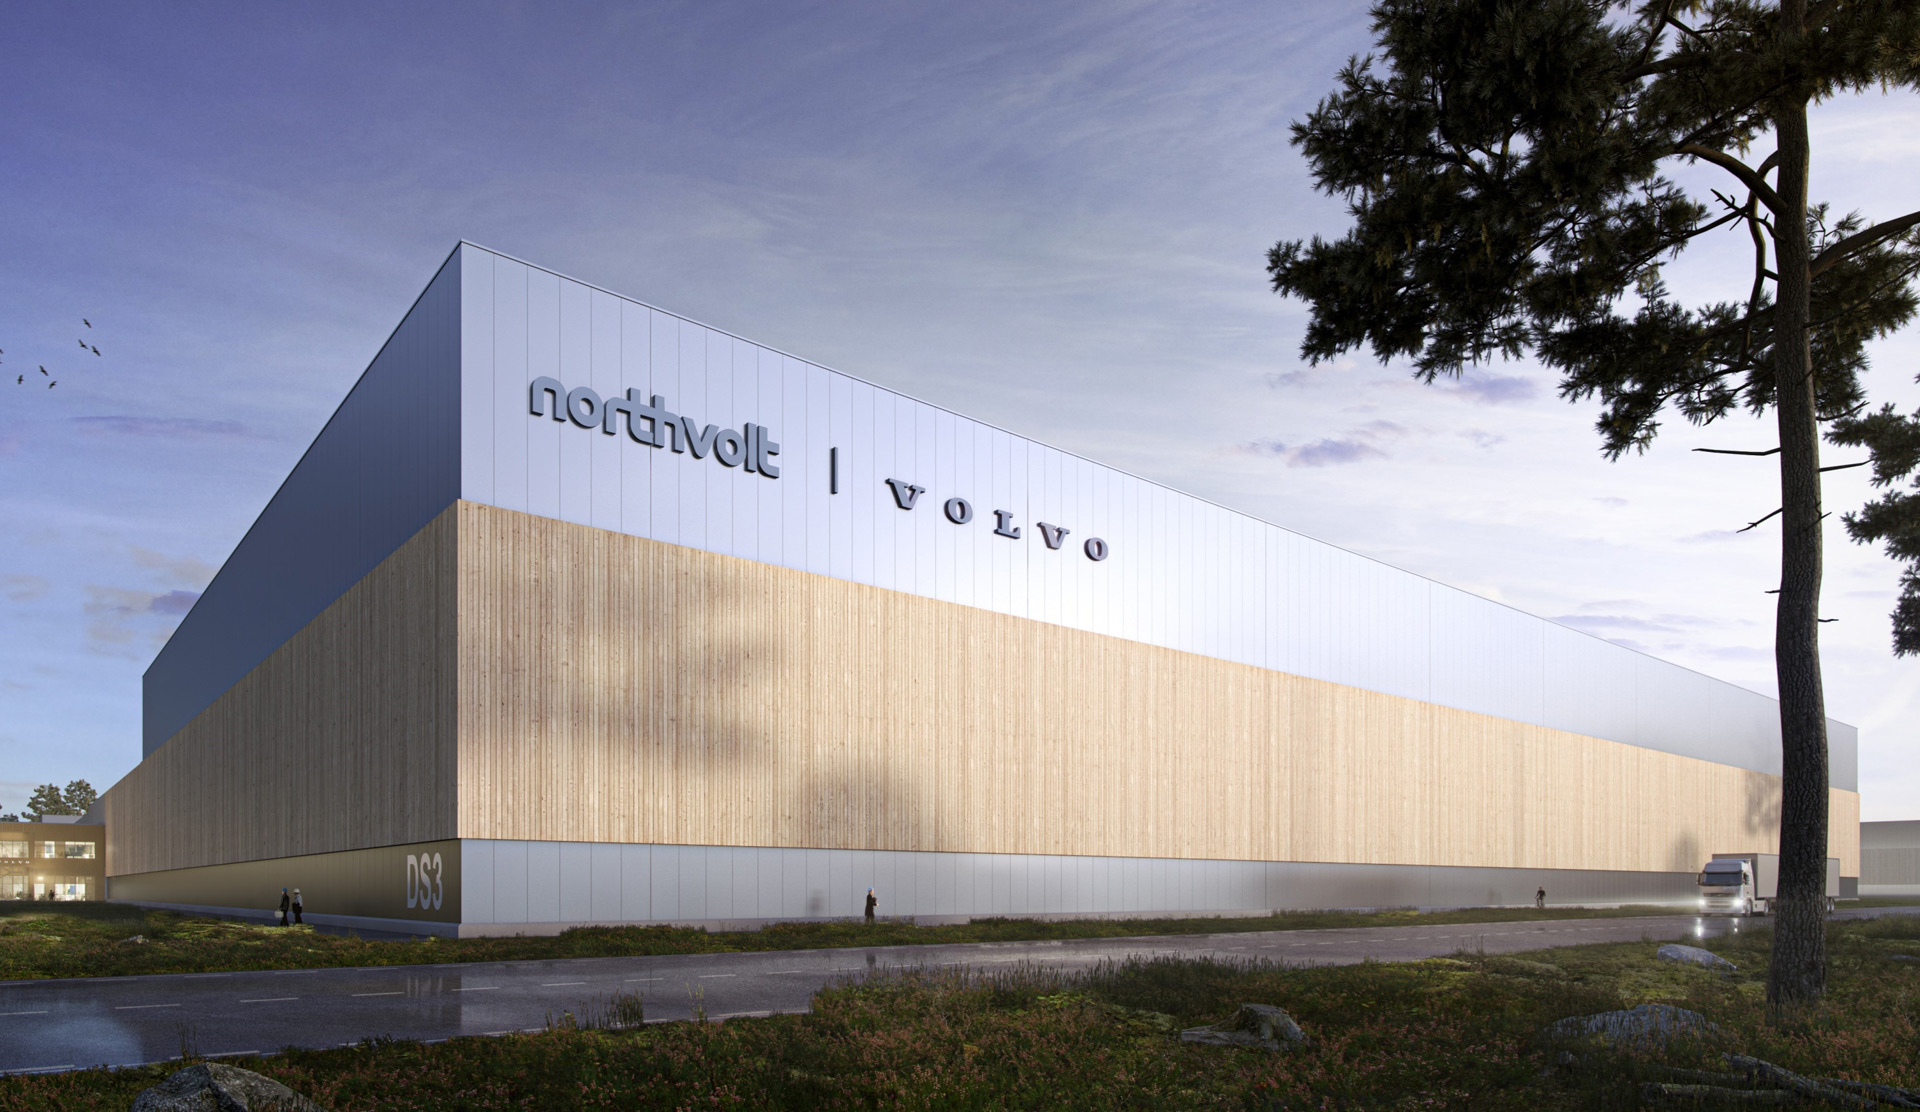 Volvo-Northvolt joint venture battery plant due in 2025, could supply for 500,000 EVs annuallyVolvo-Northvolt joint venture battery plant due in 2025, could supply for 500,000 EVs annually